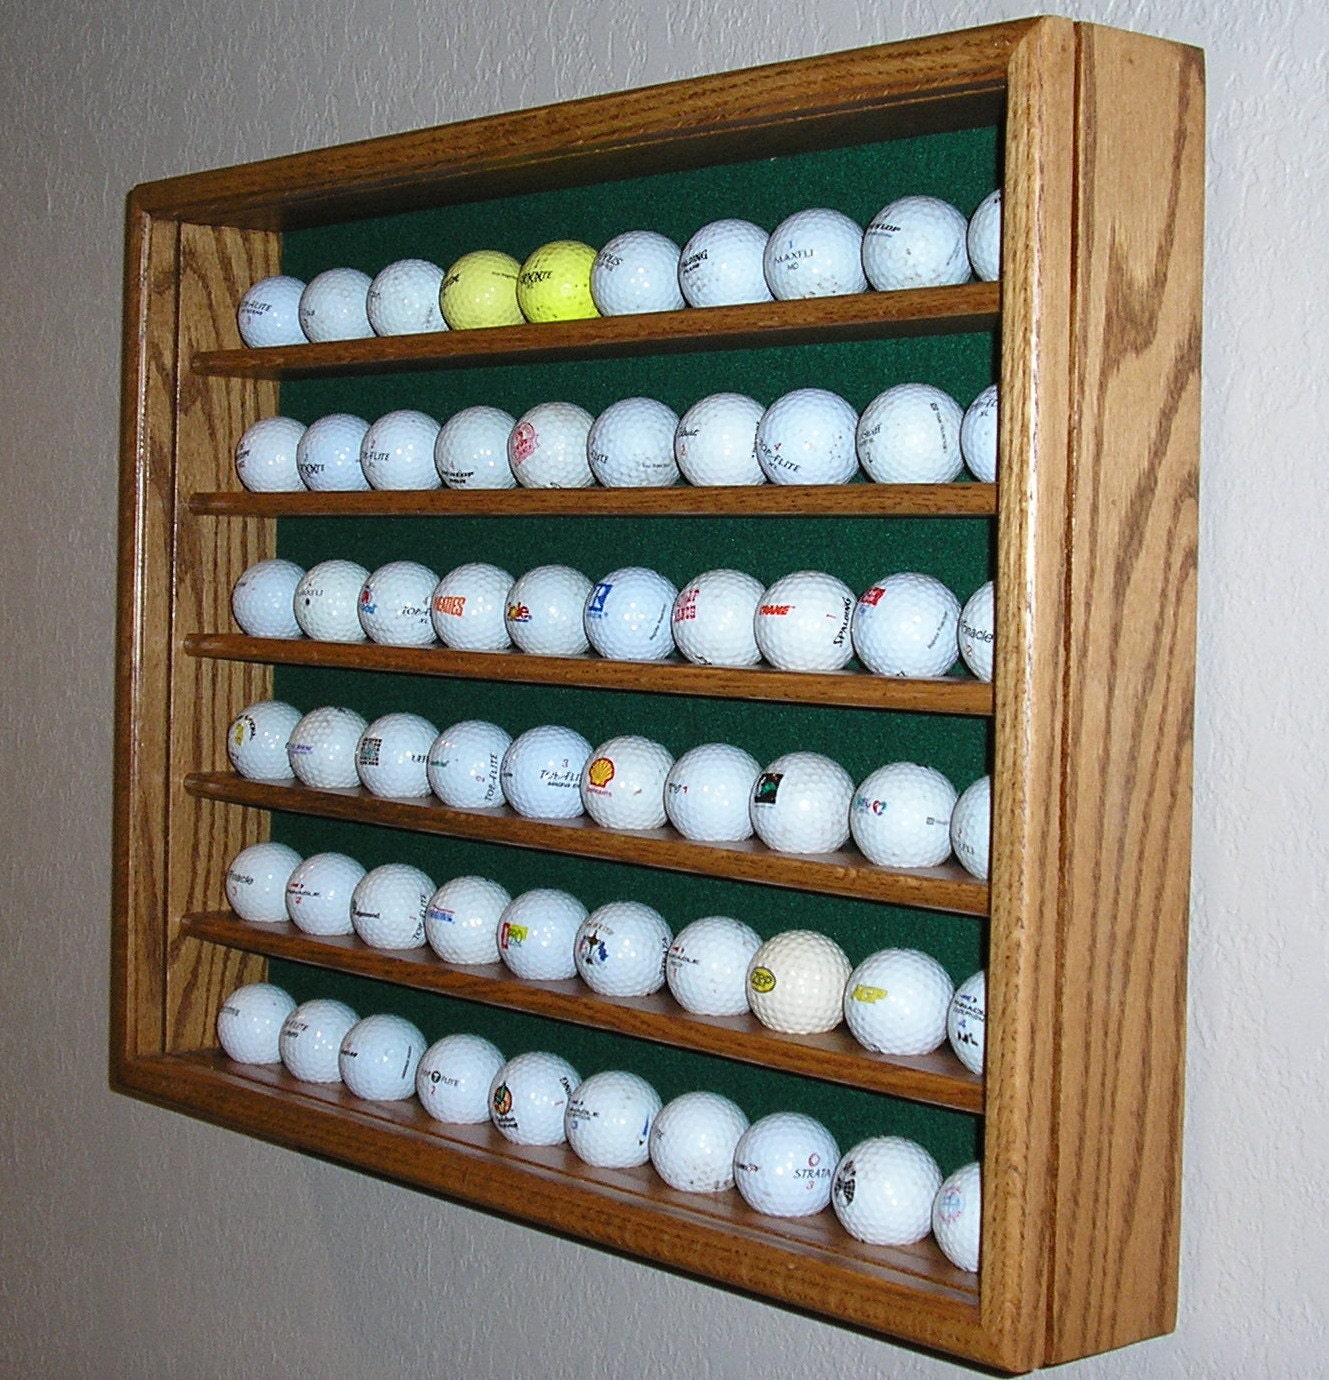 Golf Ball Case by OakCollection on Etsy